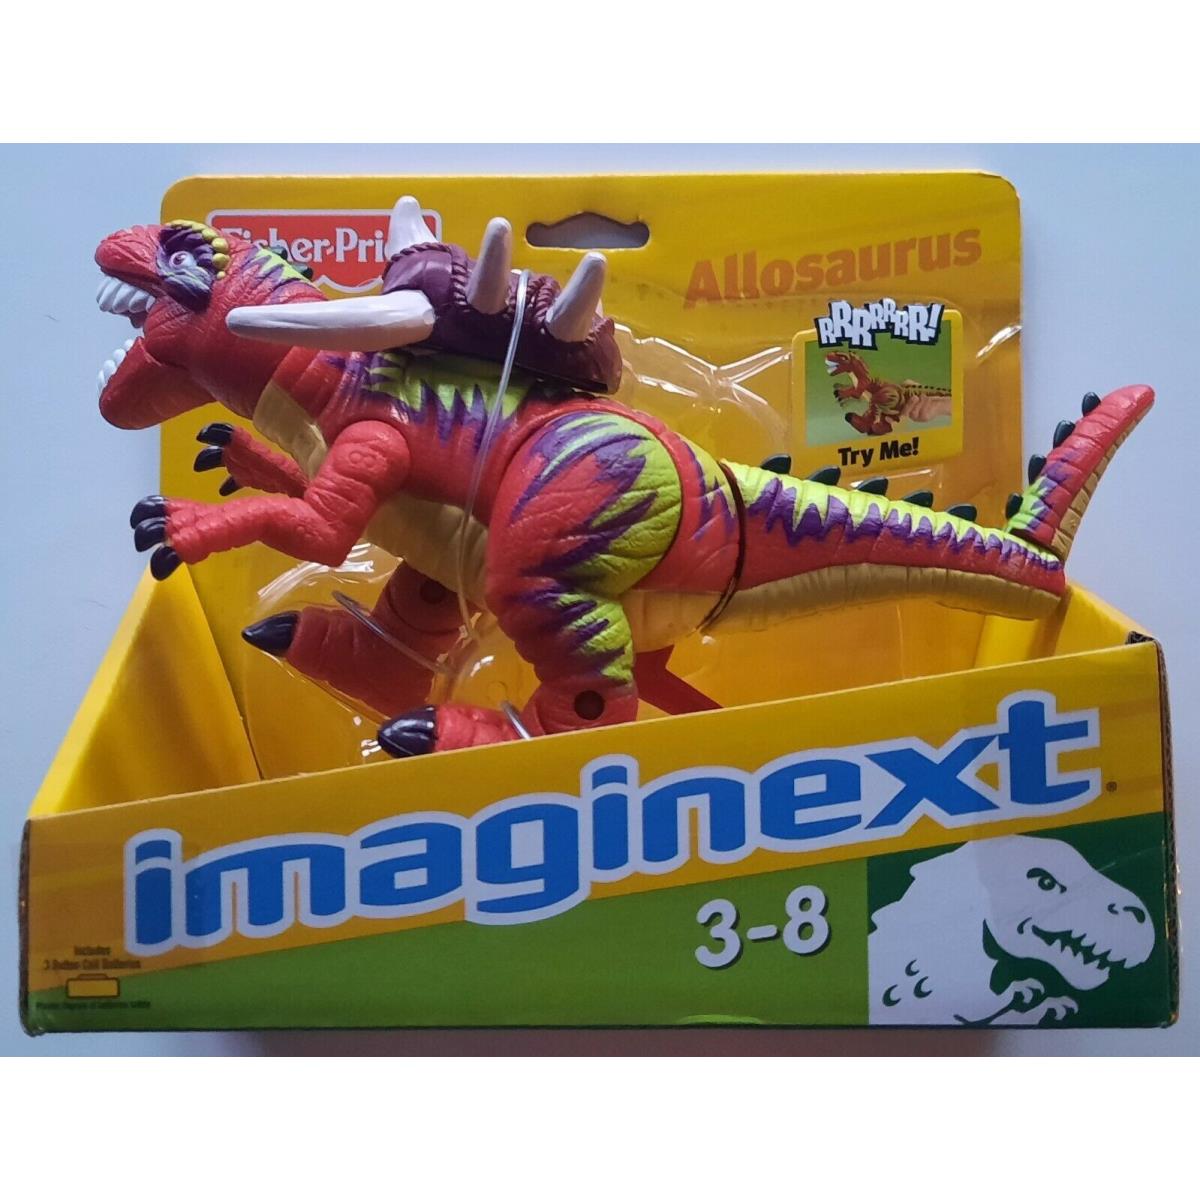 Imaginext Allosaurus By Fisher Price From 2008 - Vintage